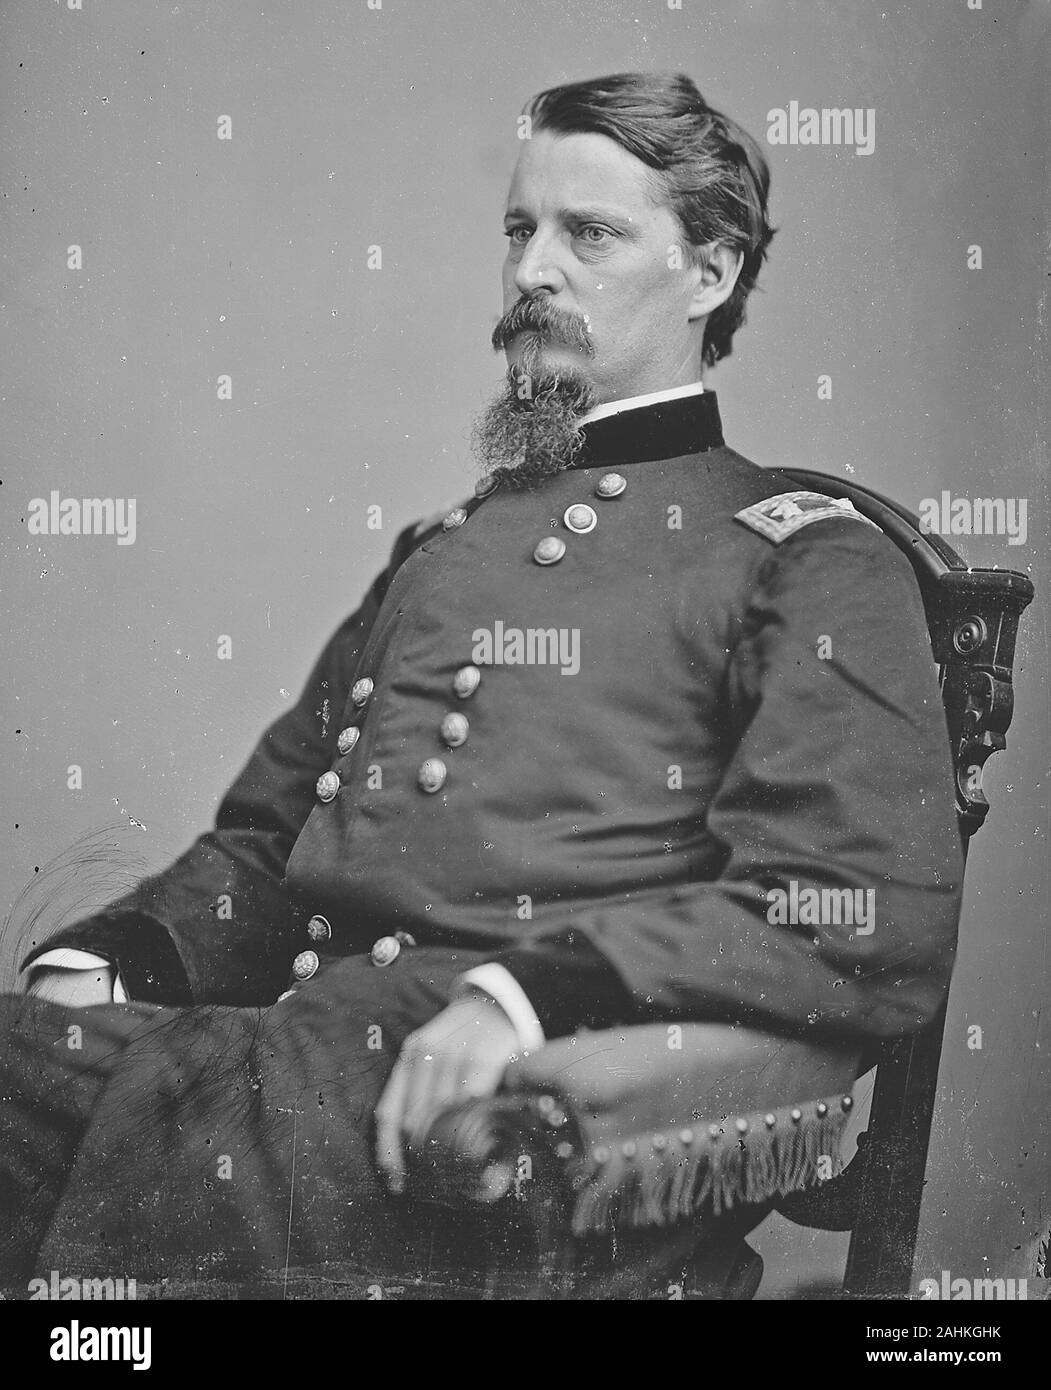 Winfield Scott Hancock (1824 – 1886) United States Army officer and the Democratic nominee for President of the United States in 1880. Stock Photo